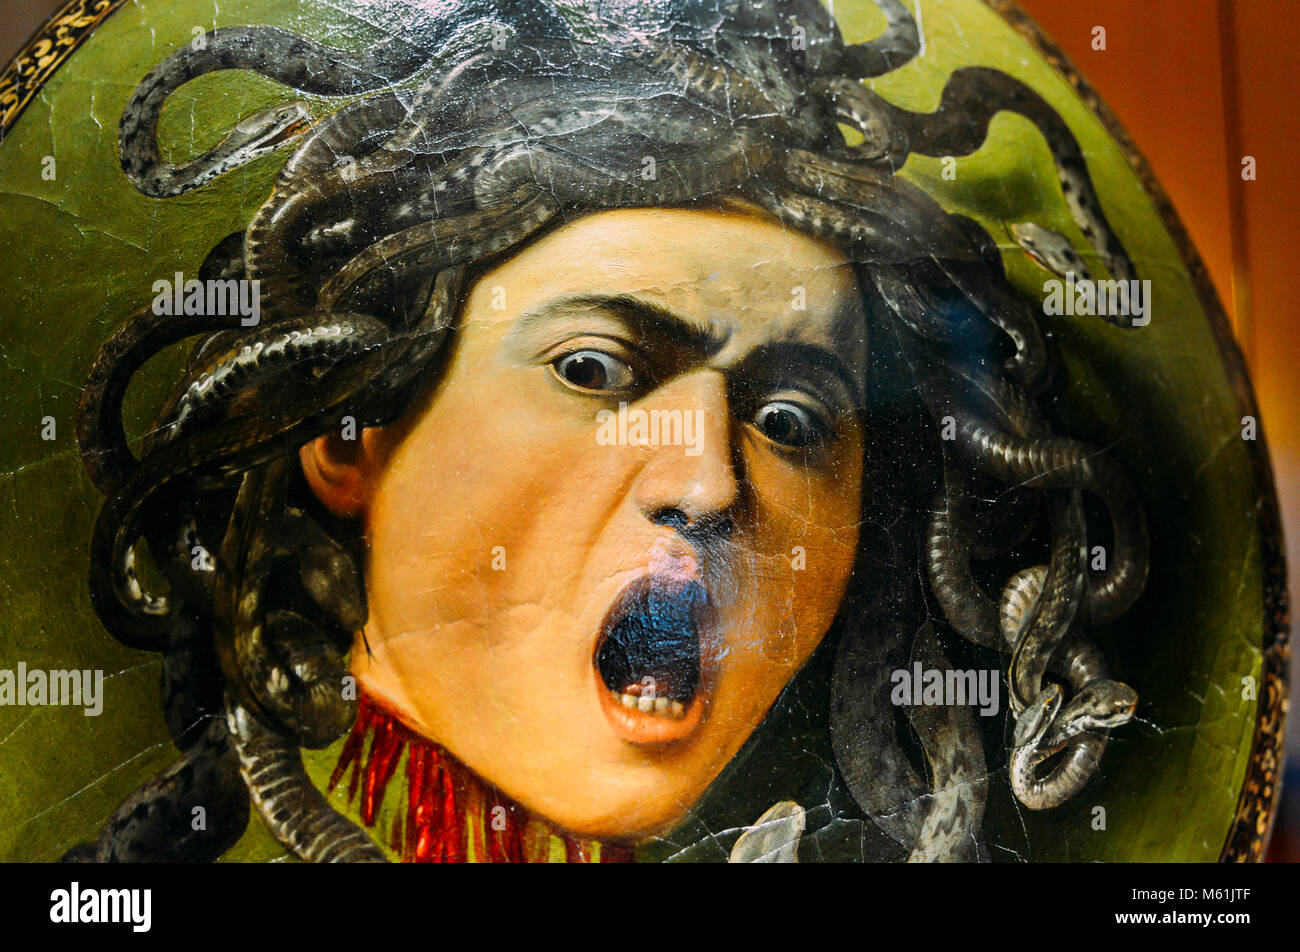 Medusa by Caravaggio at Florence, Italy's Uffizi museum, commissioned by  Cardinal del Monte, who gave it as a gift to Ferdinando I de Medici in 1597  Stock Photo - Alamy